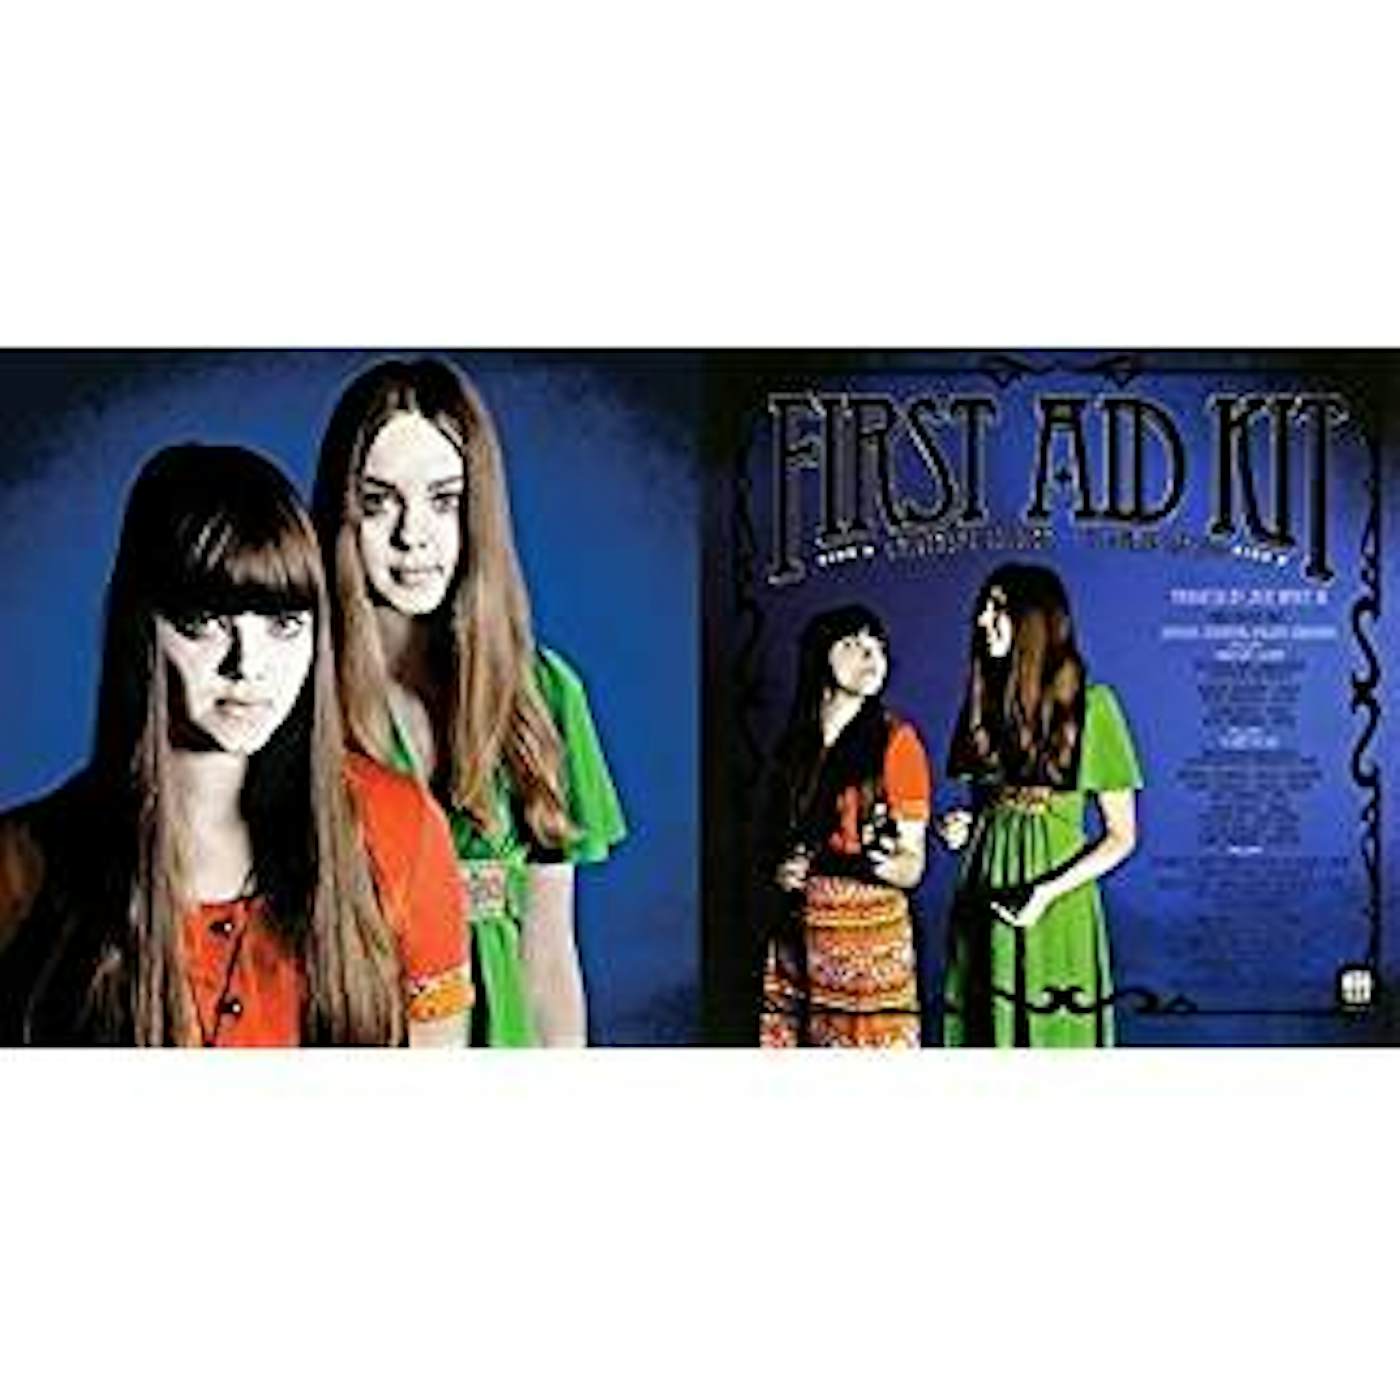 First Aid Kit UNIVERSAL SOLDIER / IT HURTS ME TOO Vinyl Record